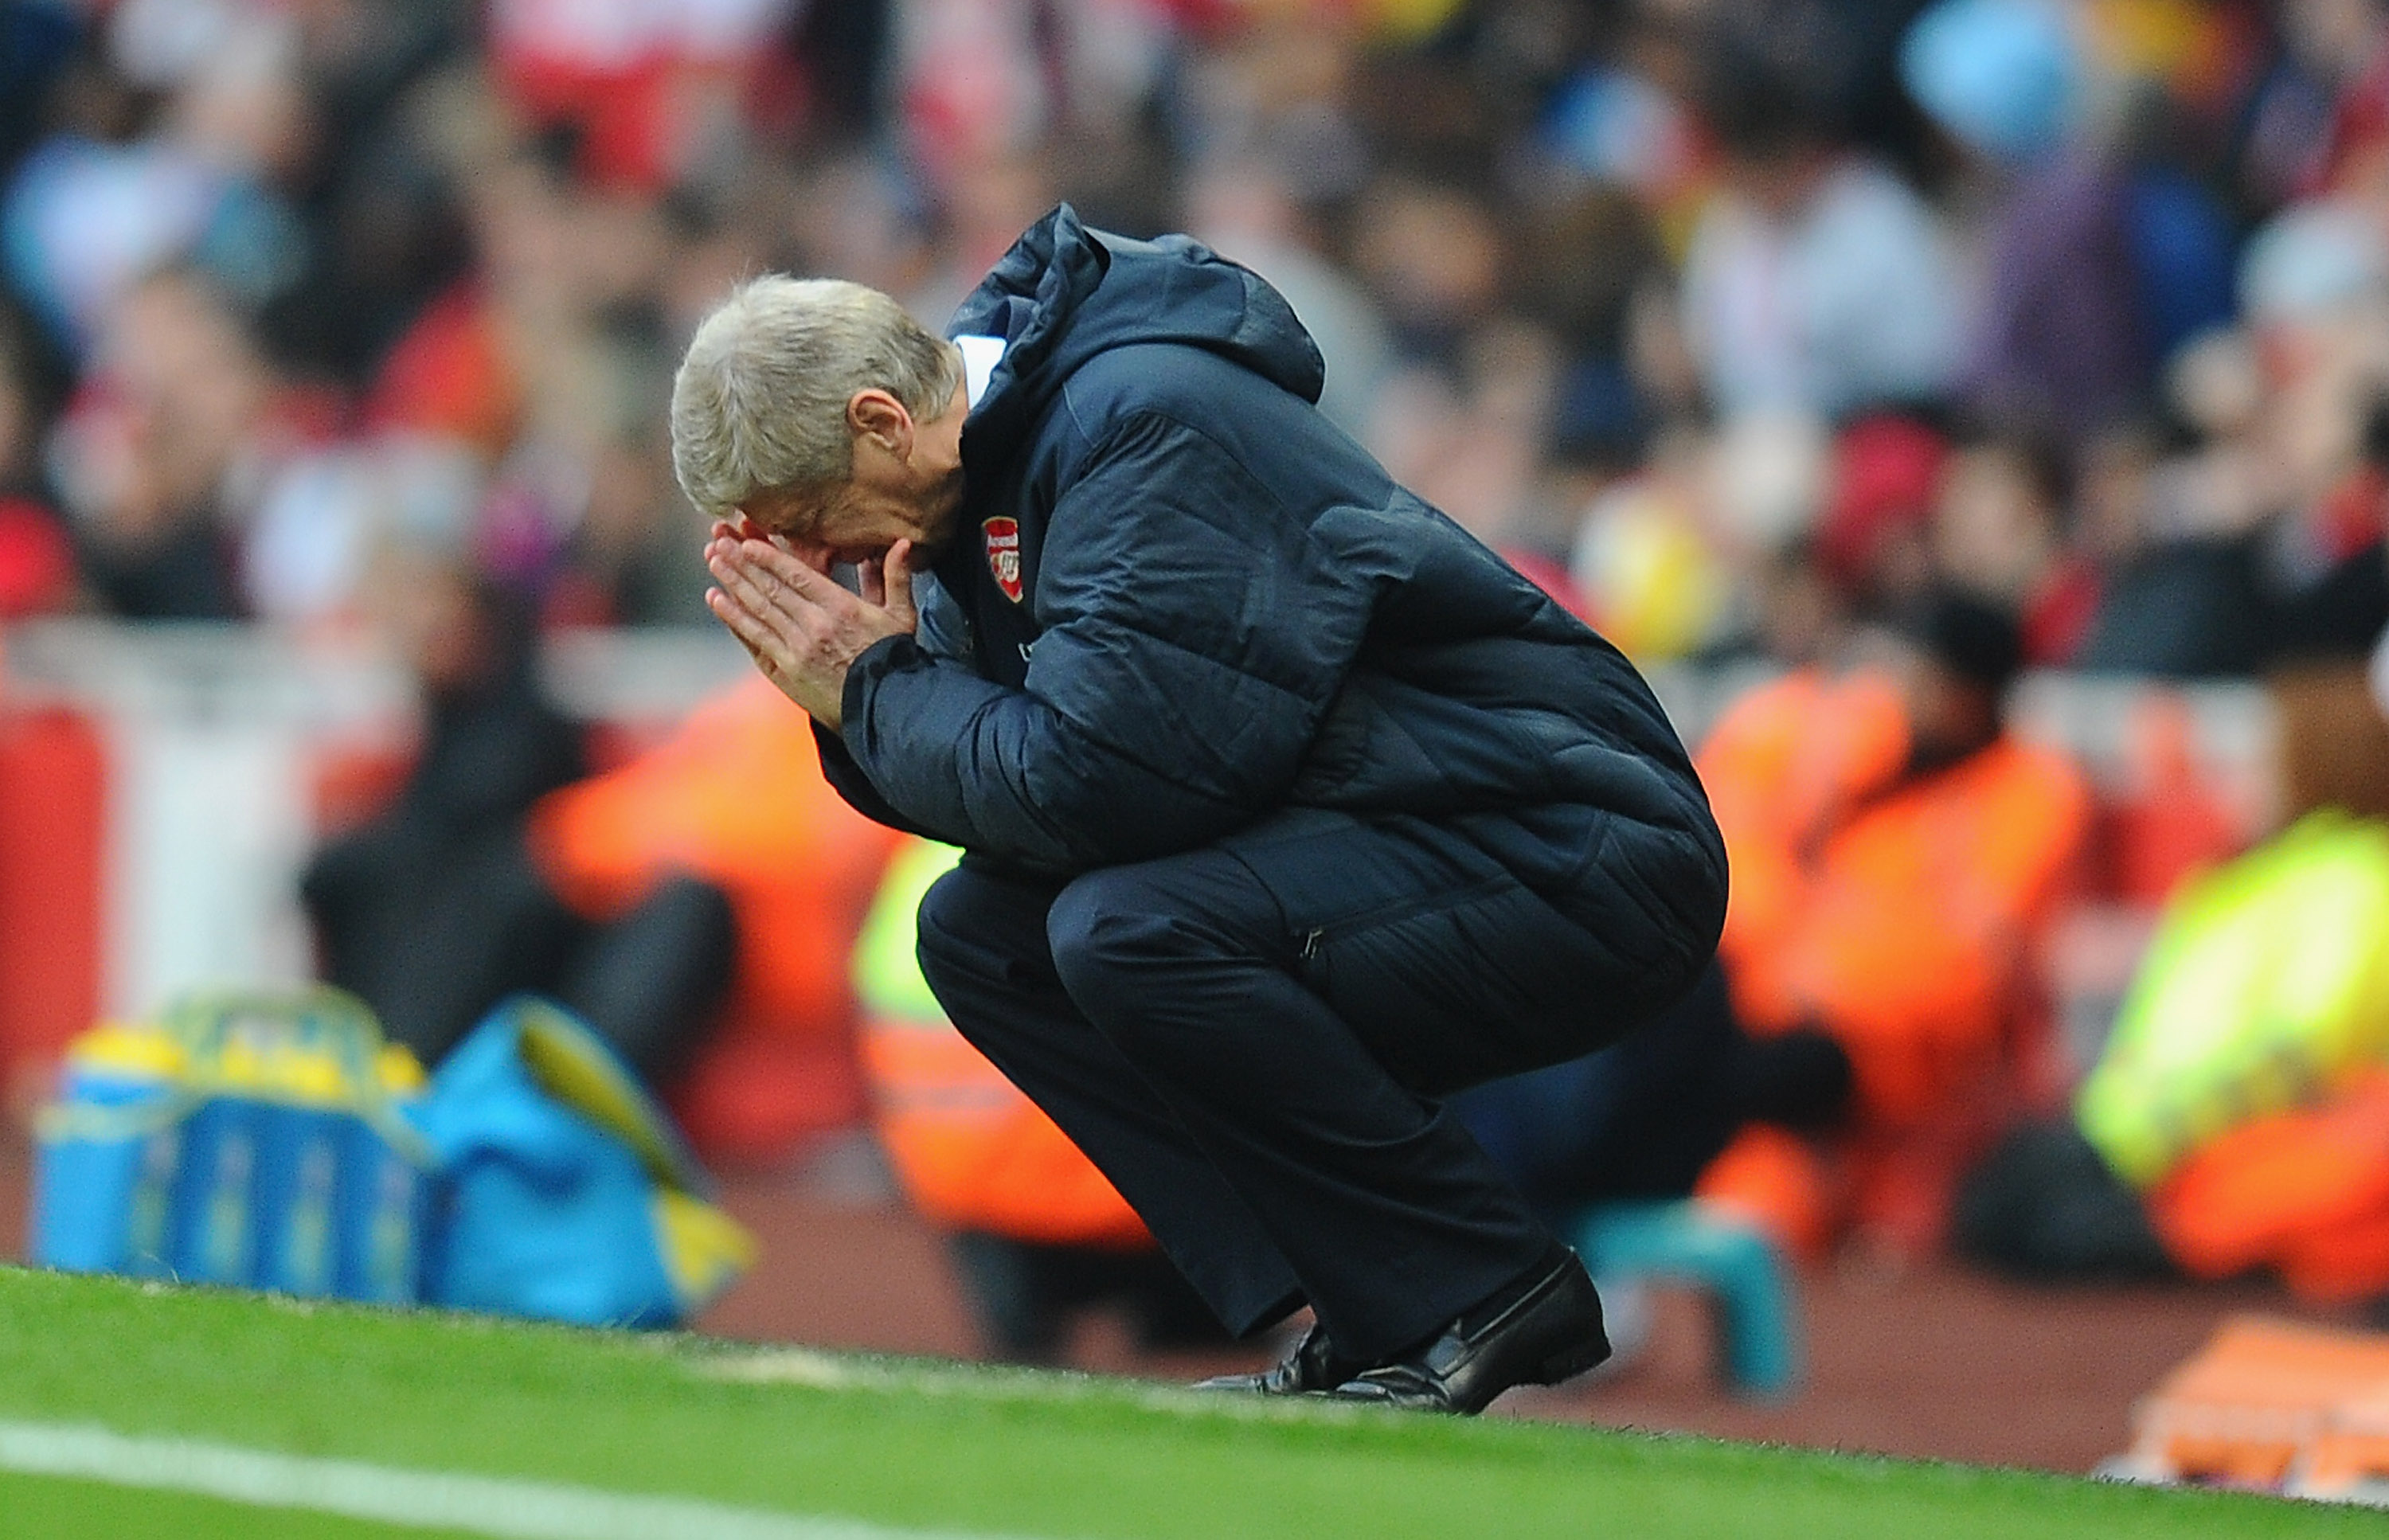 LONDON, ENGLAND - NOVEMBER 20:  Arsenal manager Arsene Wenger reacts to Tottenham's winning goal during the Barclays Premier League match between Arsenal and Tottenham Hotspur at the Emirates Stadium on November 20, 2010 in London, England.  (Photo by Mik